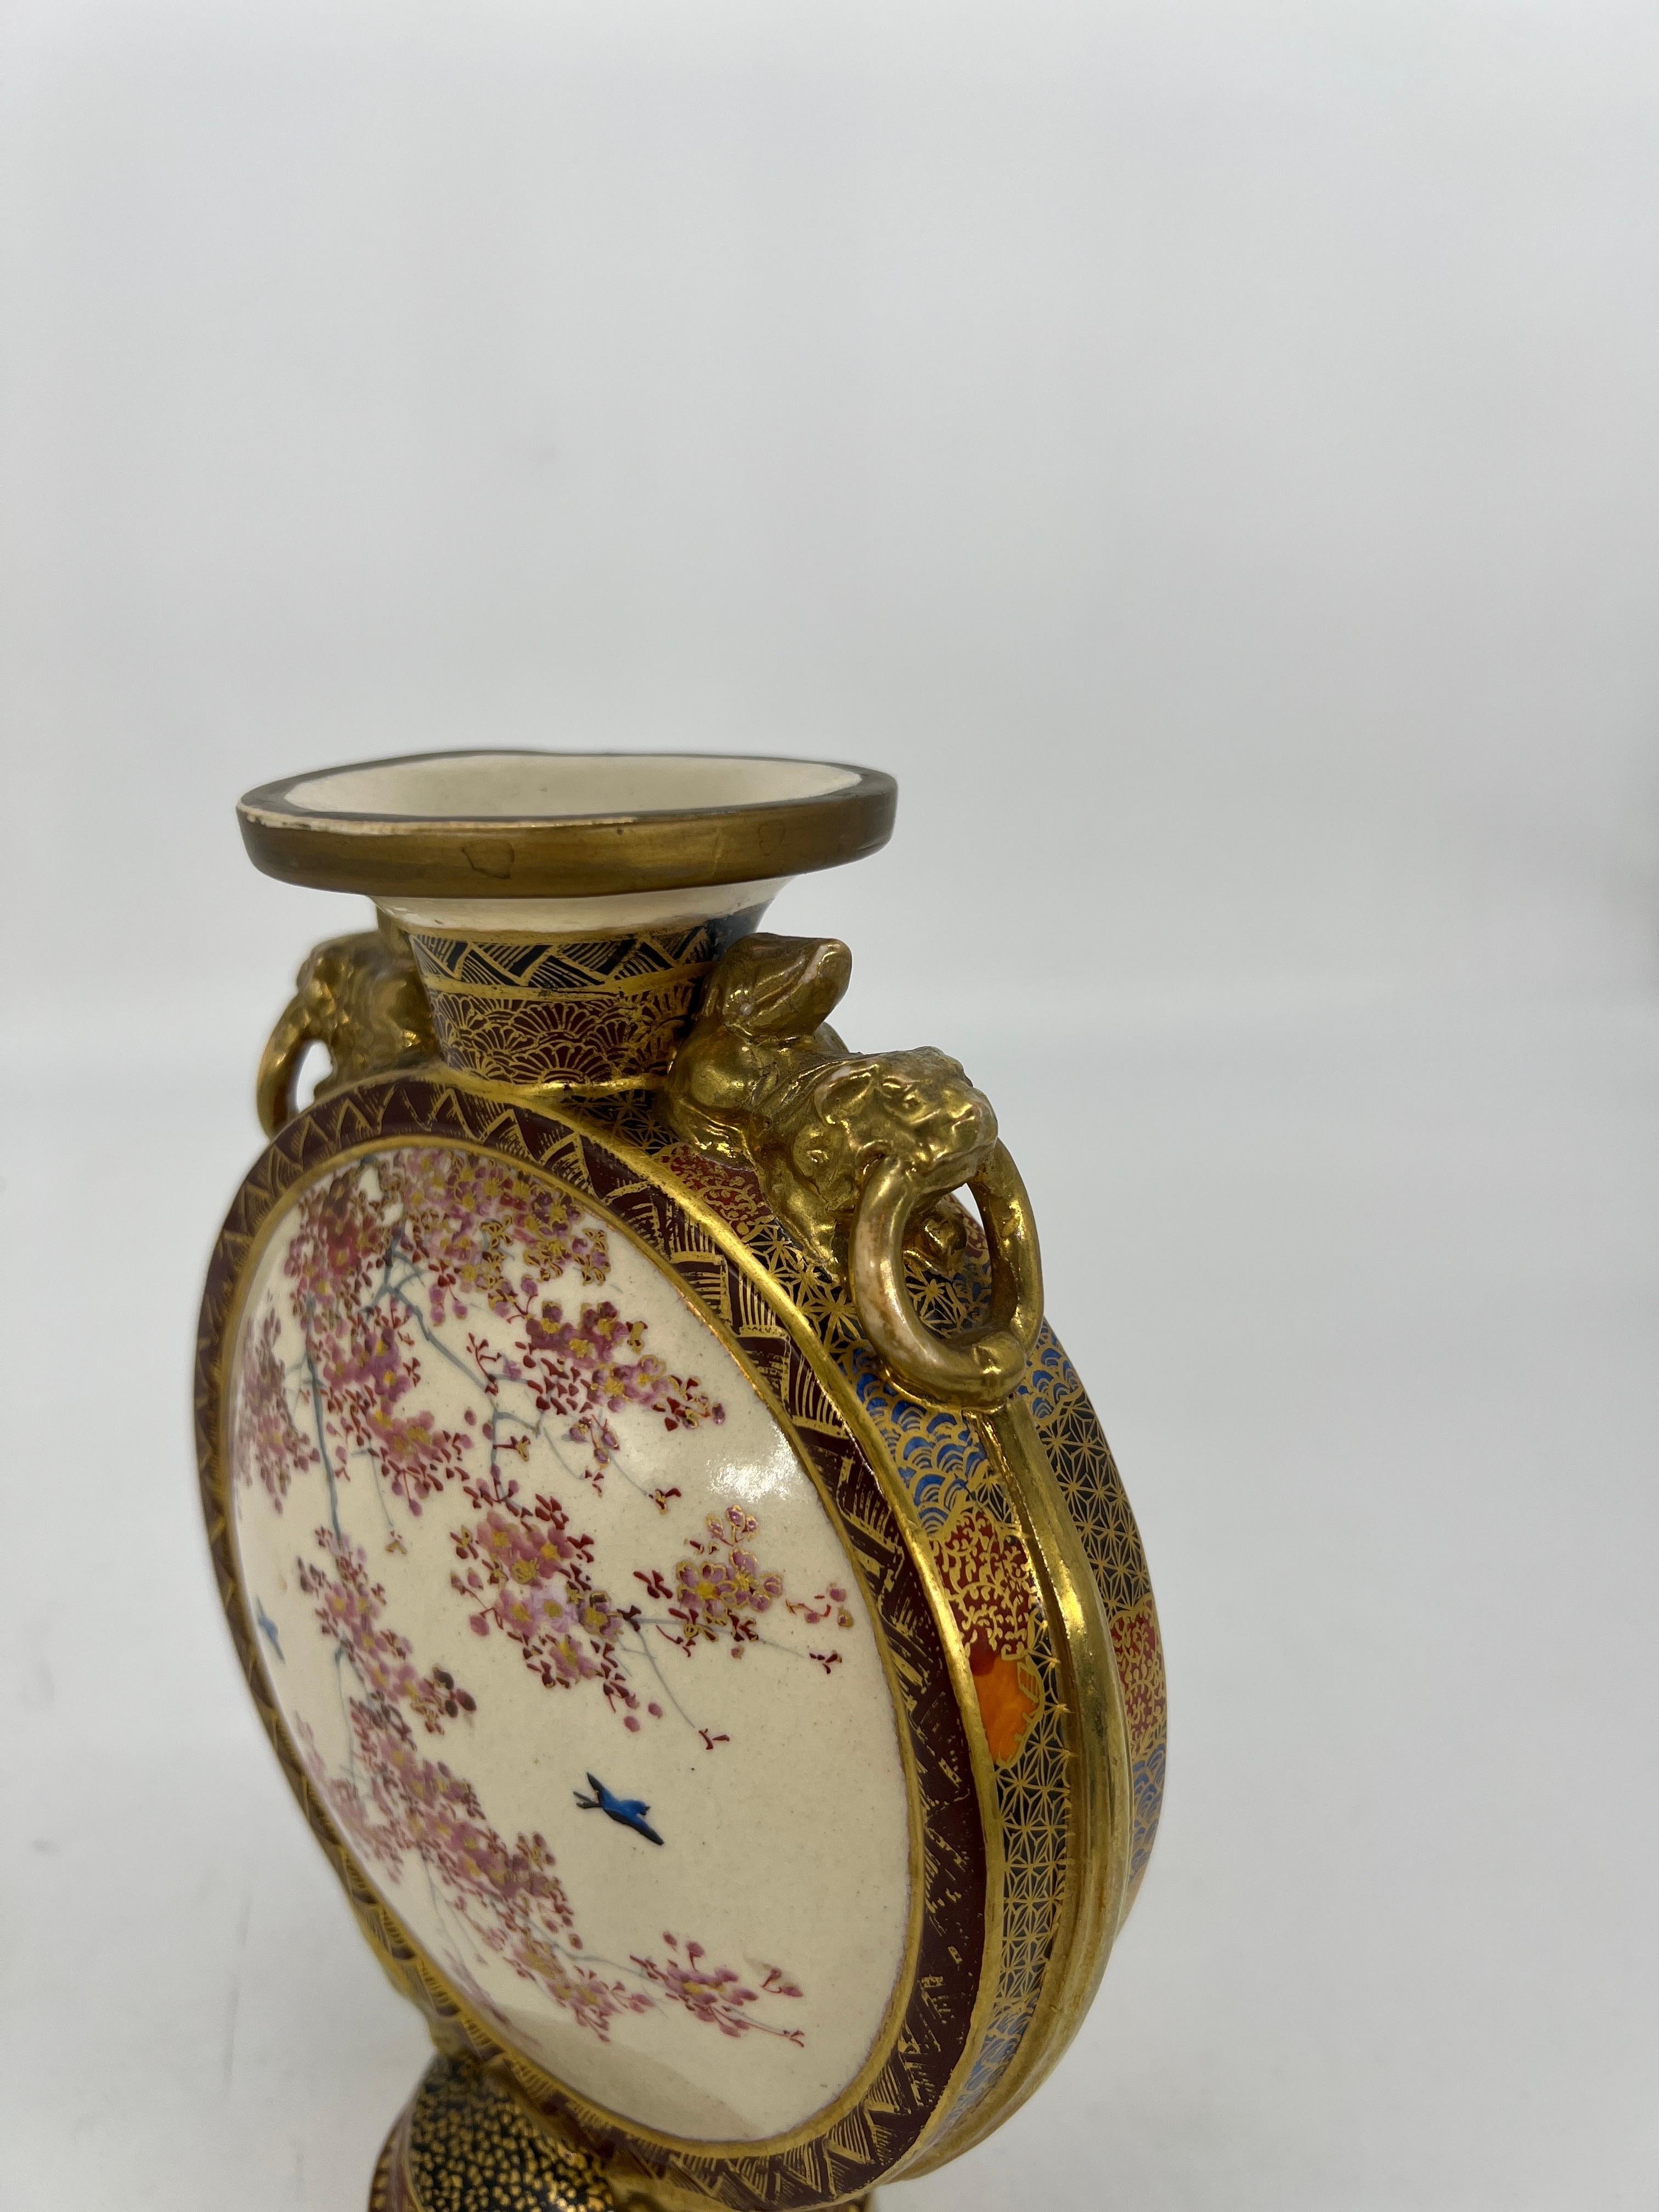 Antique Japanese Satsuma Porcelain Moon Flask Vase Decorated With Peacocks For Sale 2